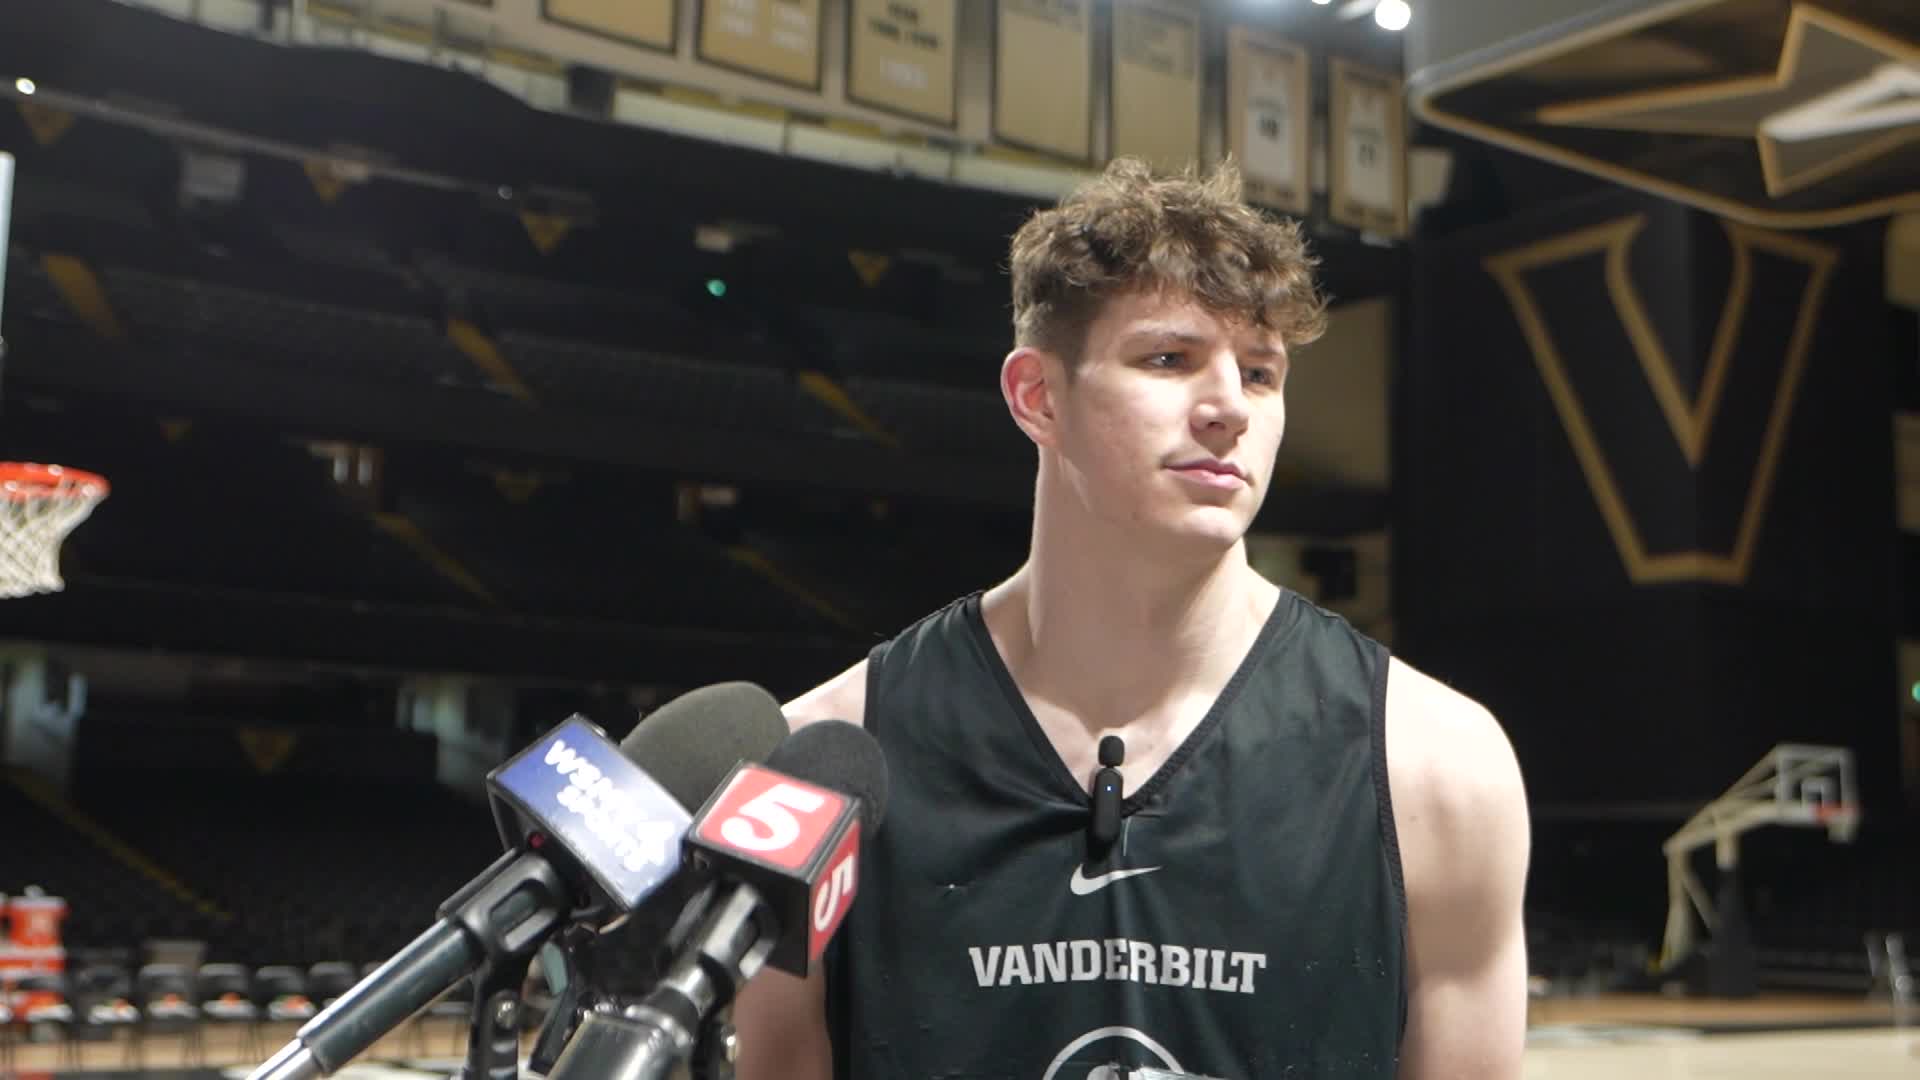 Vanderbilt's Tyrin Lawrence stuns No. 6 Tennessee with perfect buzzer-beater